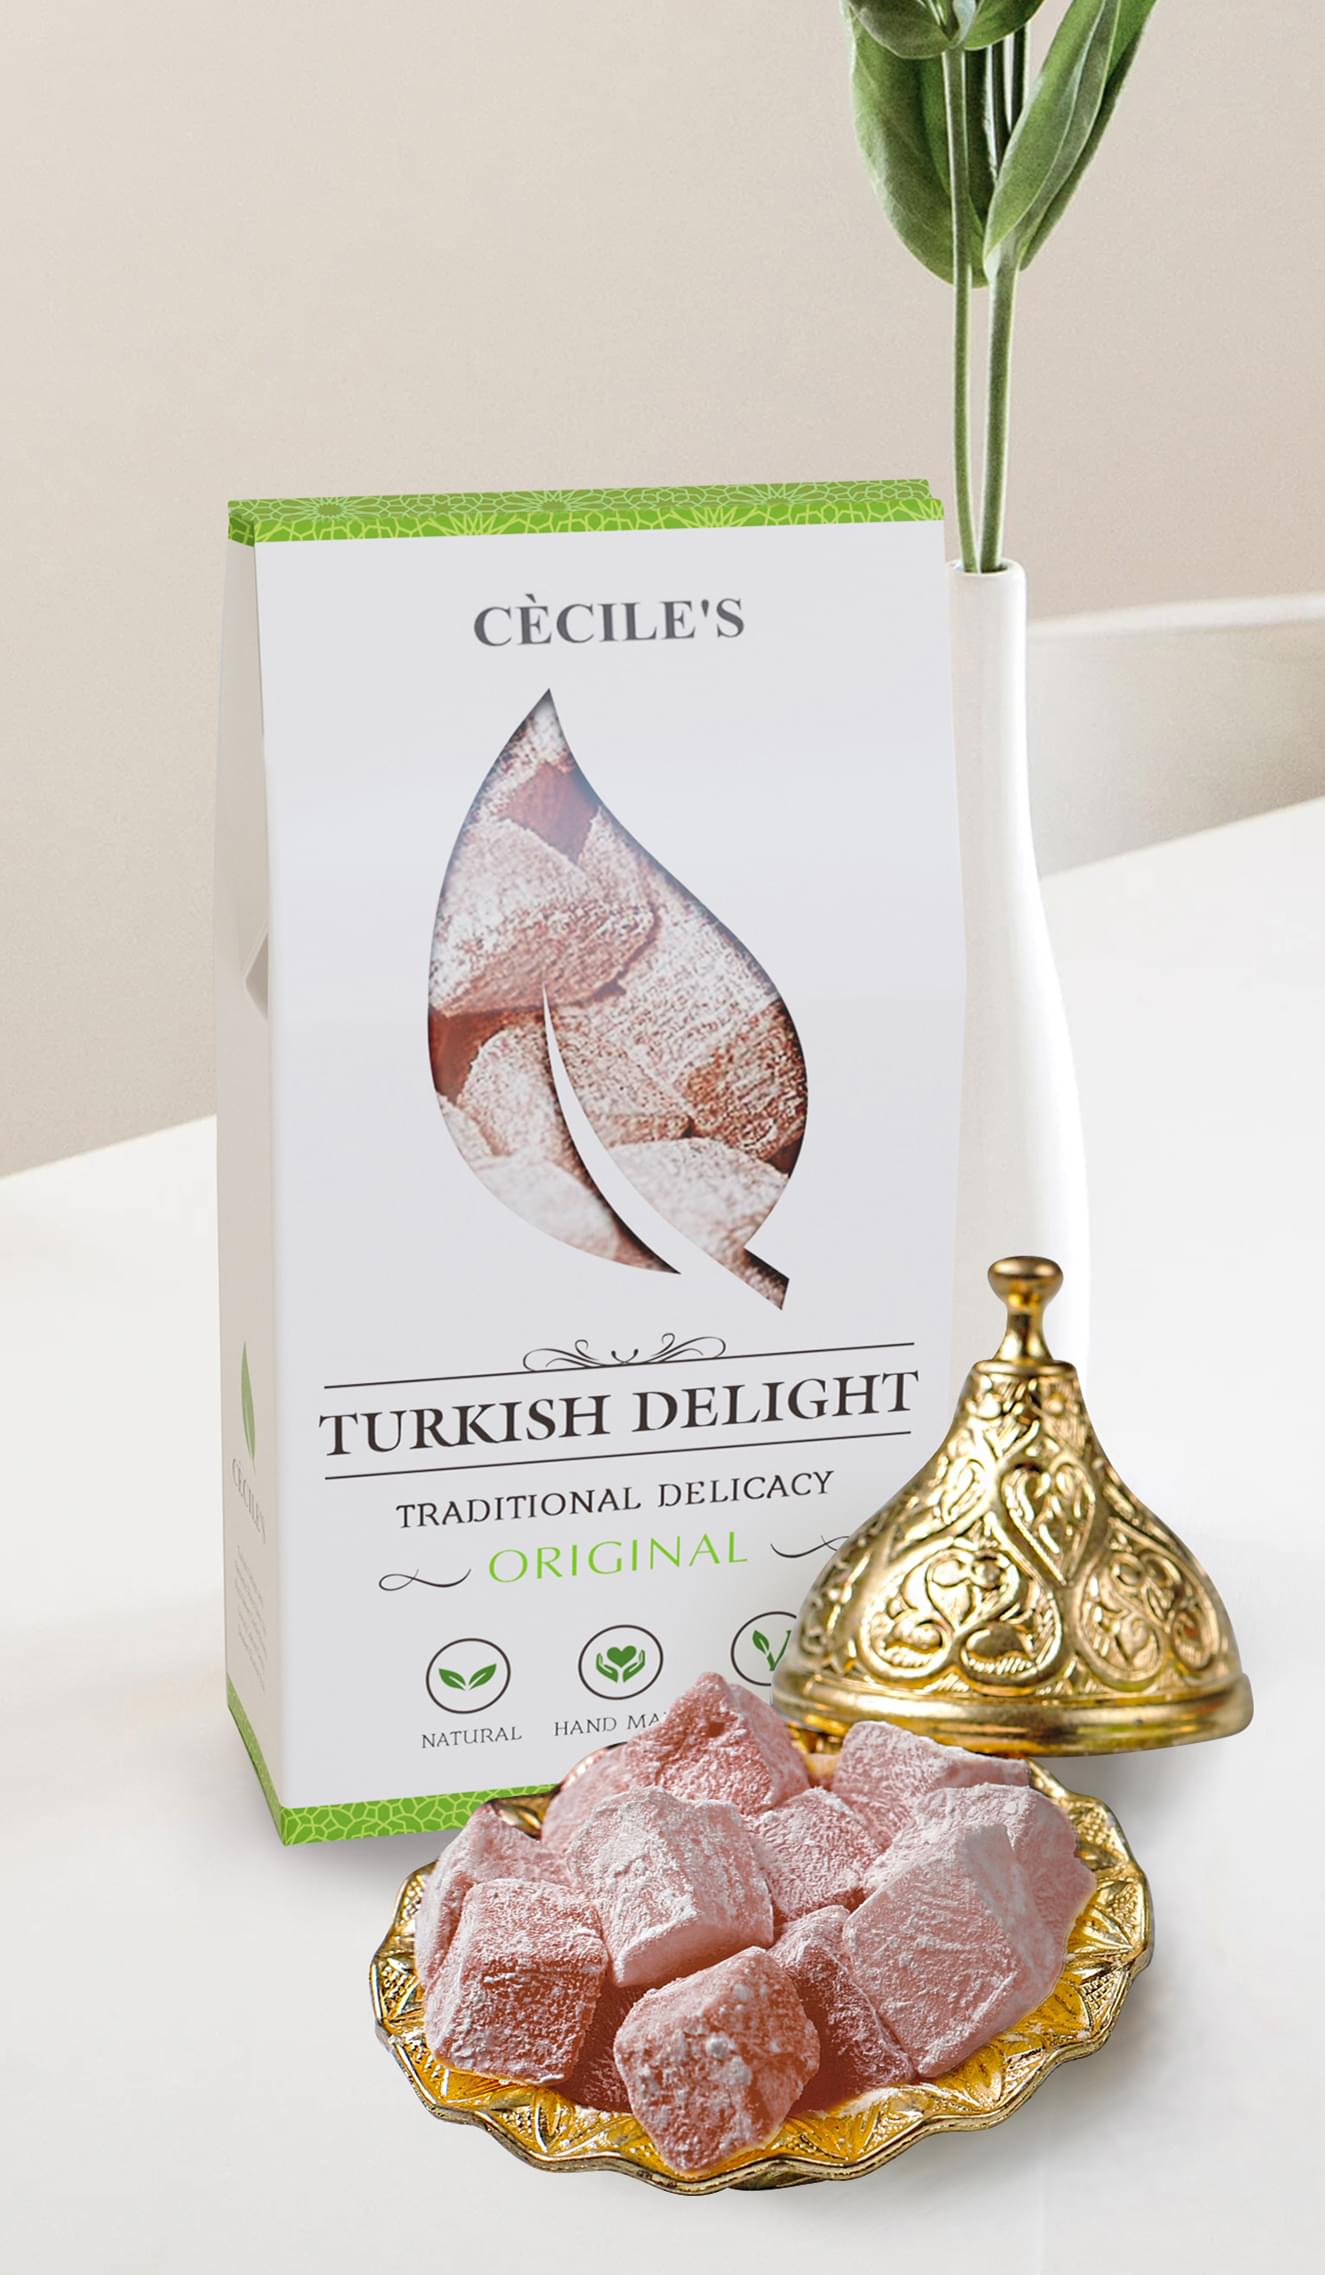 CECILE’S Packaging